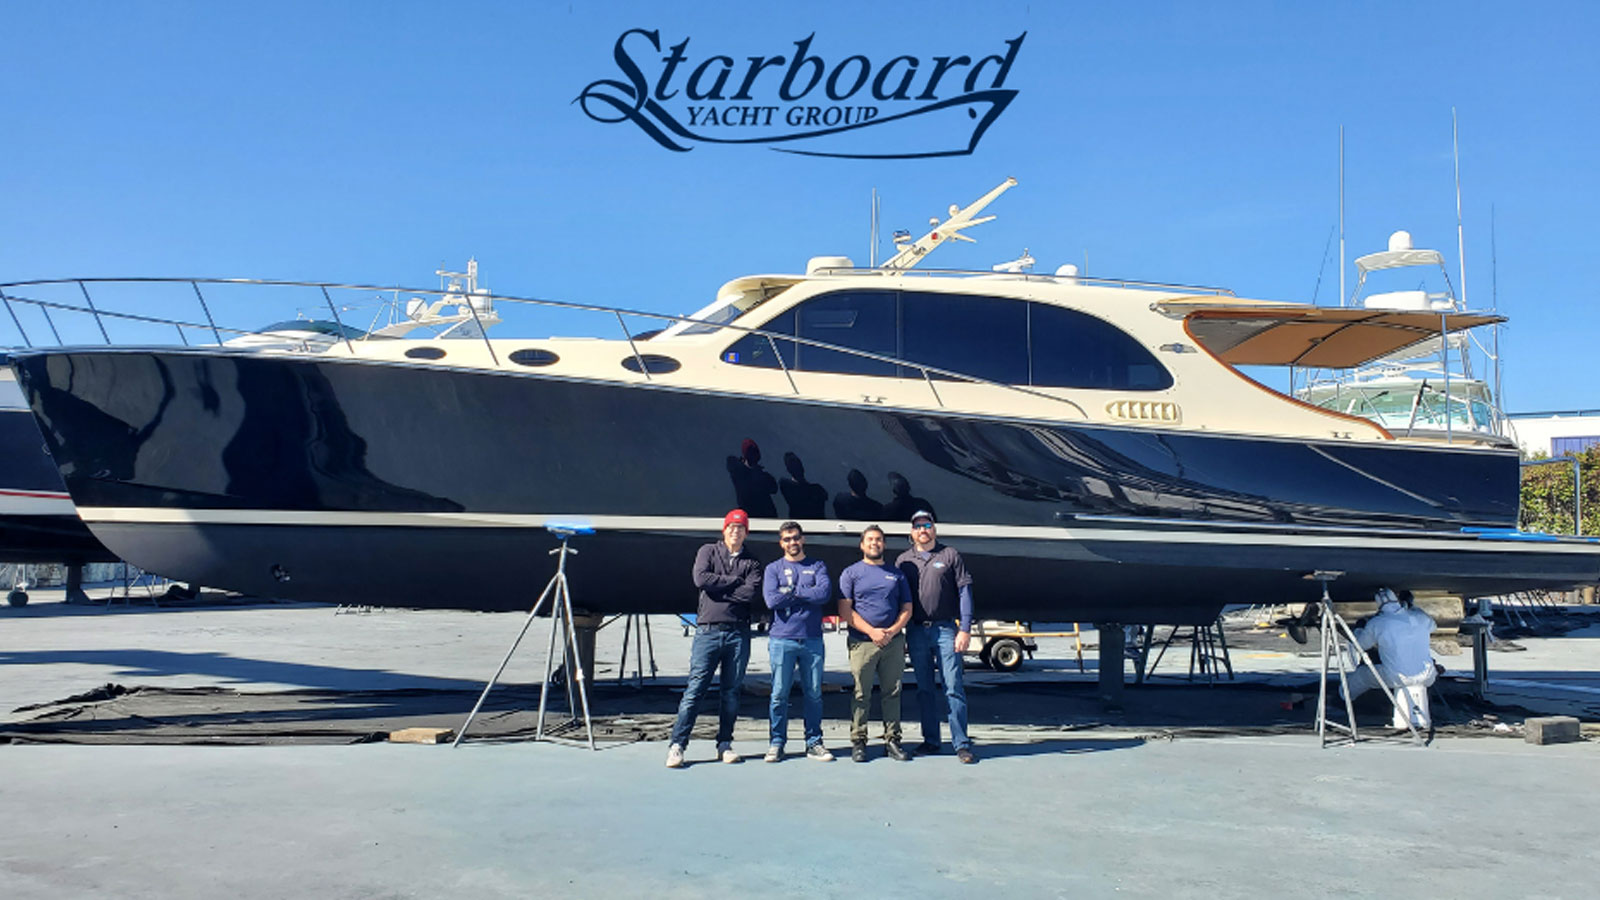 The team at Starboard Yacht Group